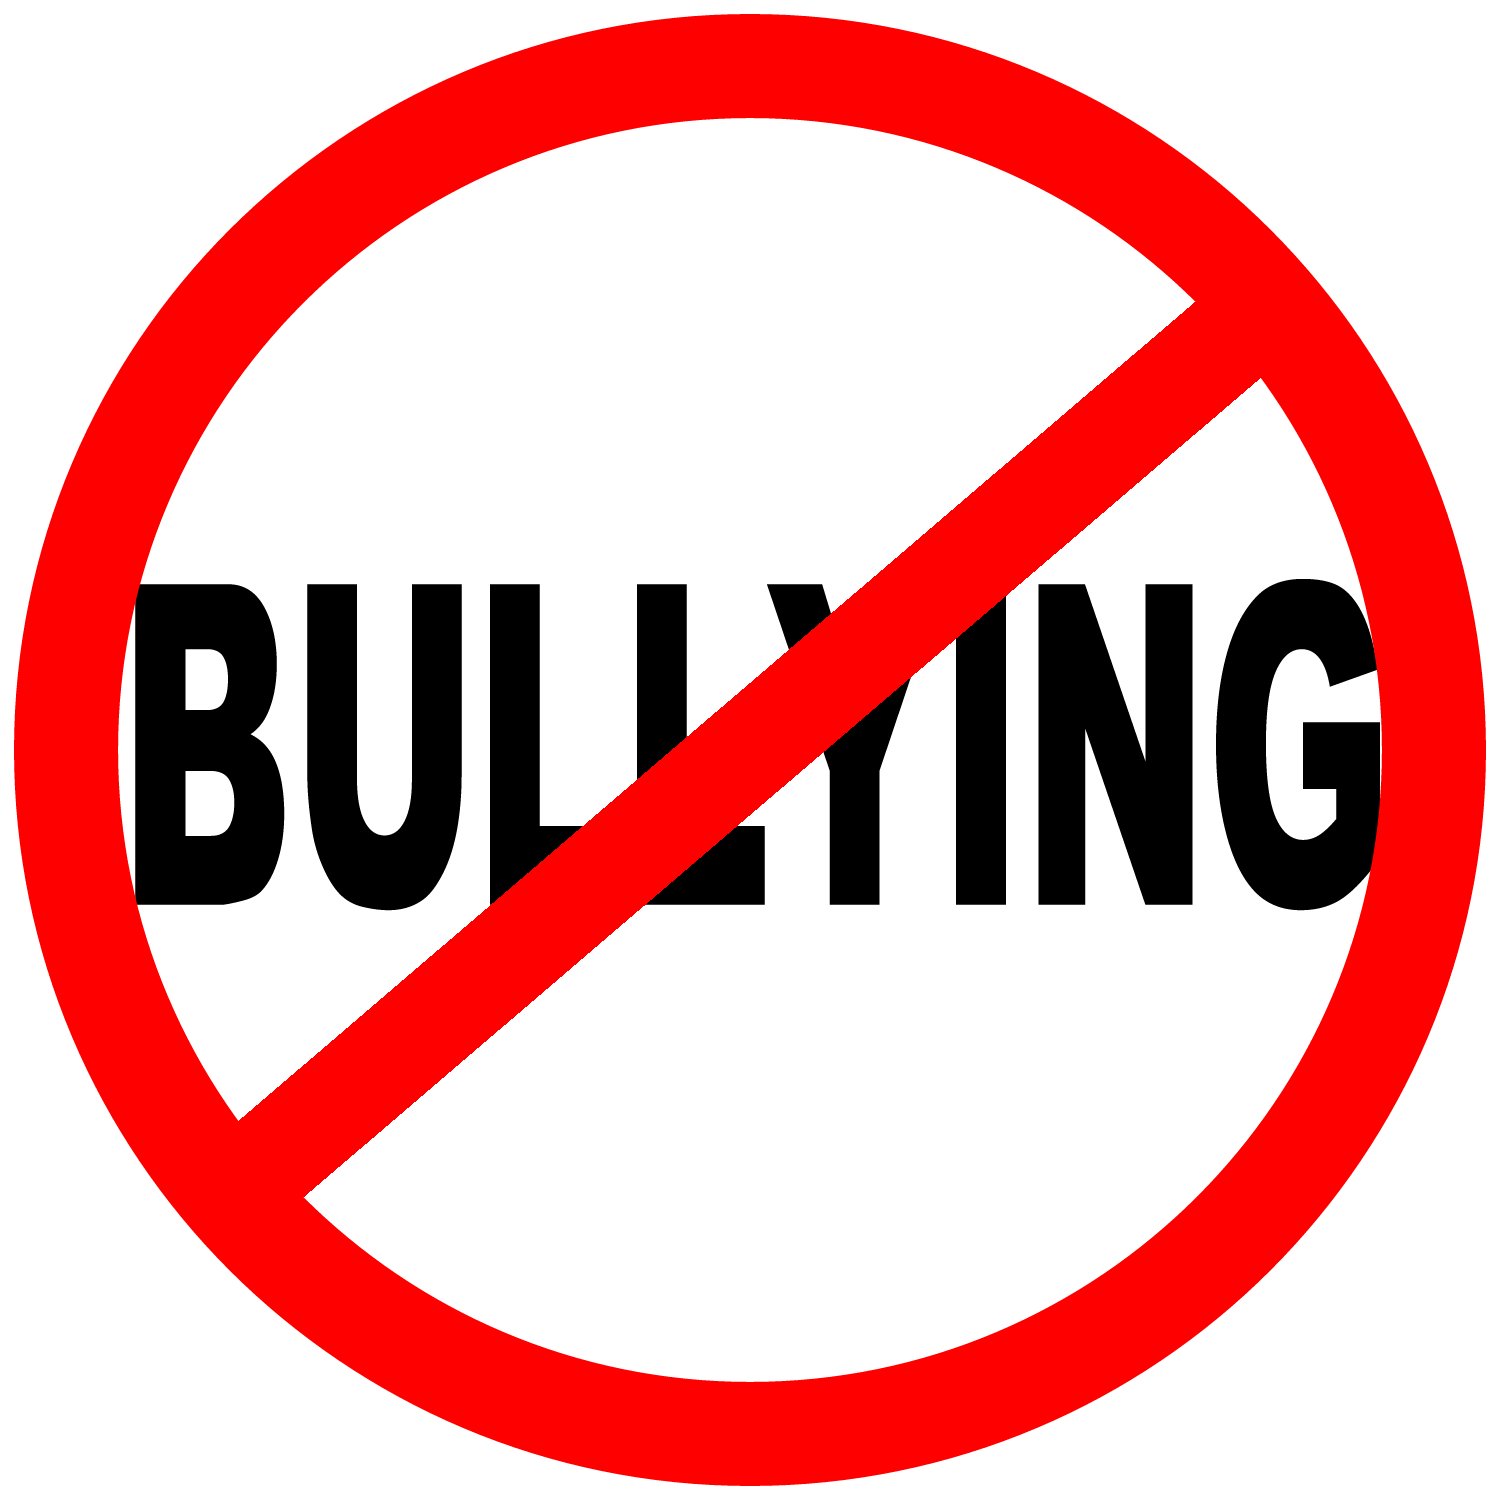 This is a campaign is about students getting bullied around the world.We made this tweeter so students could have a safe place to express their feelings.